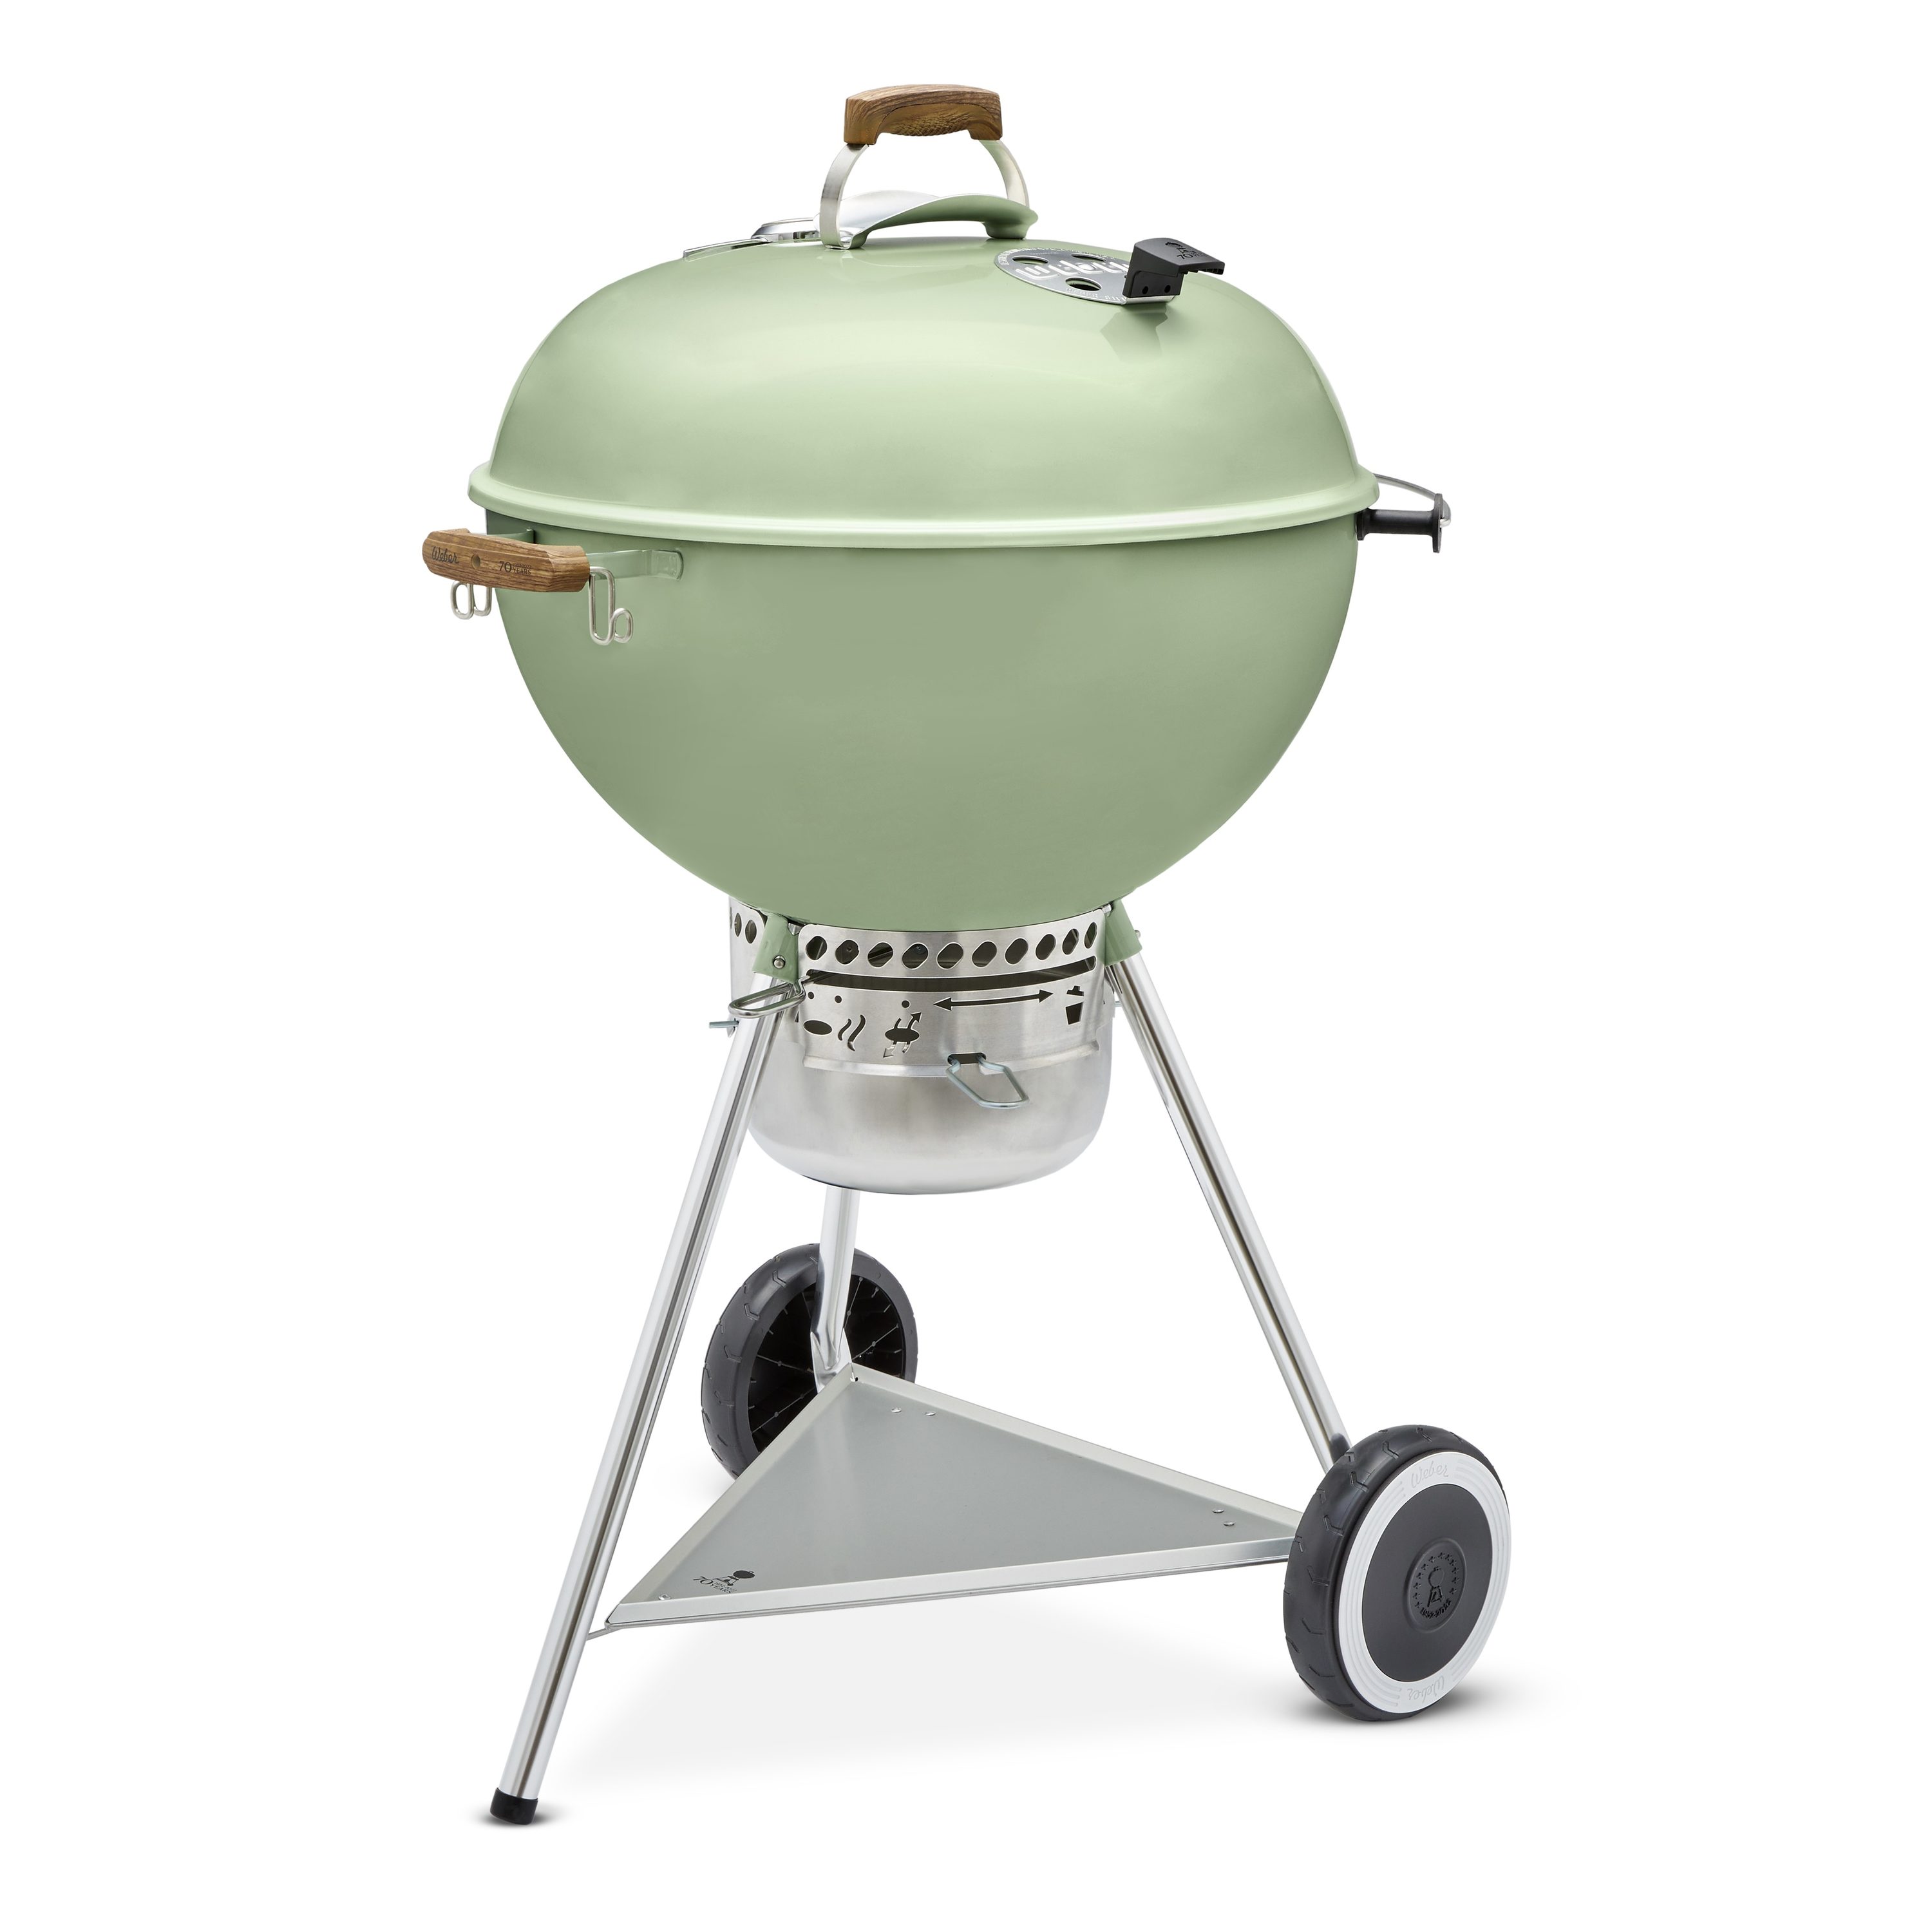 Little Griddle Kettle - Q Stainless Steel Griddle for Round Grills